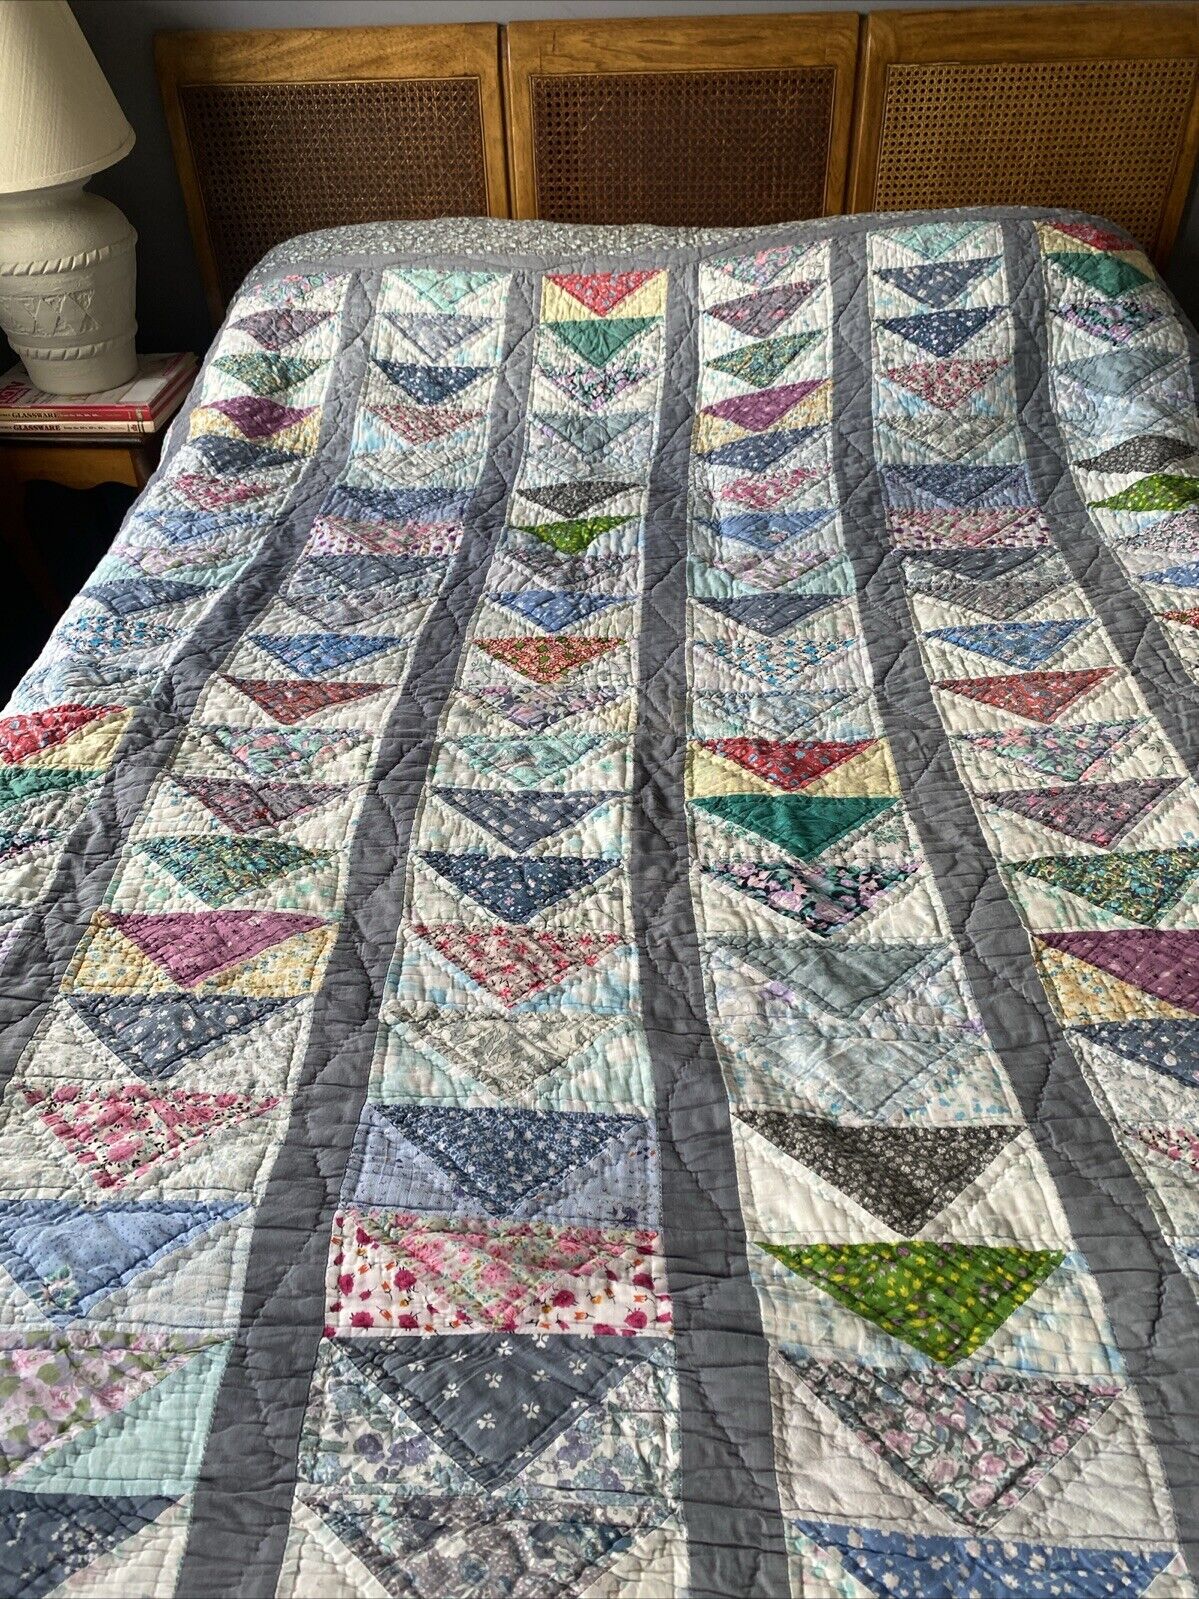 Antique/ Vintage Hand Stitched Queen Size Flying Geese Quilt 88” X 86”.